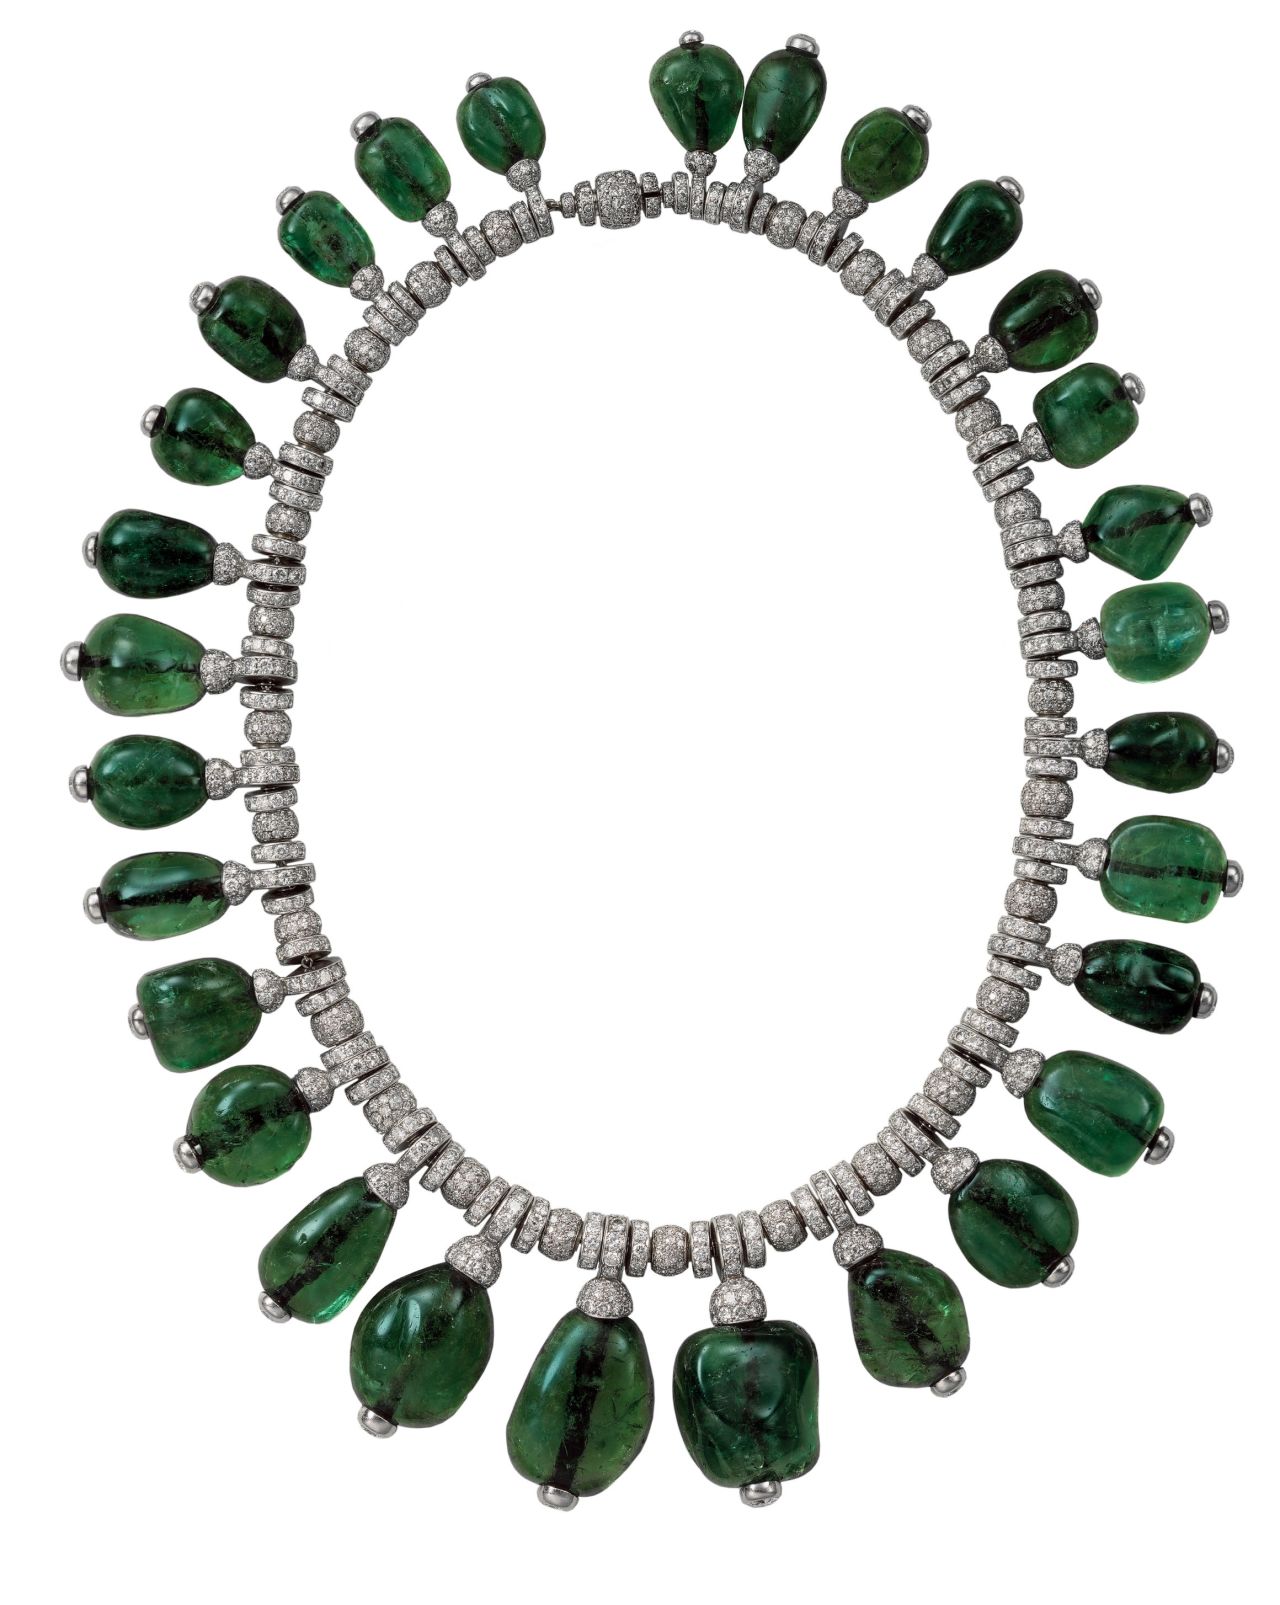 Cartier emerald necklace commissioned in 1938 by Merle Oberon. Flexible chain in round-cut diamonds with 29 graduated emerald cabochons, tipped with diamonds, suspended from it. 